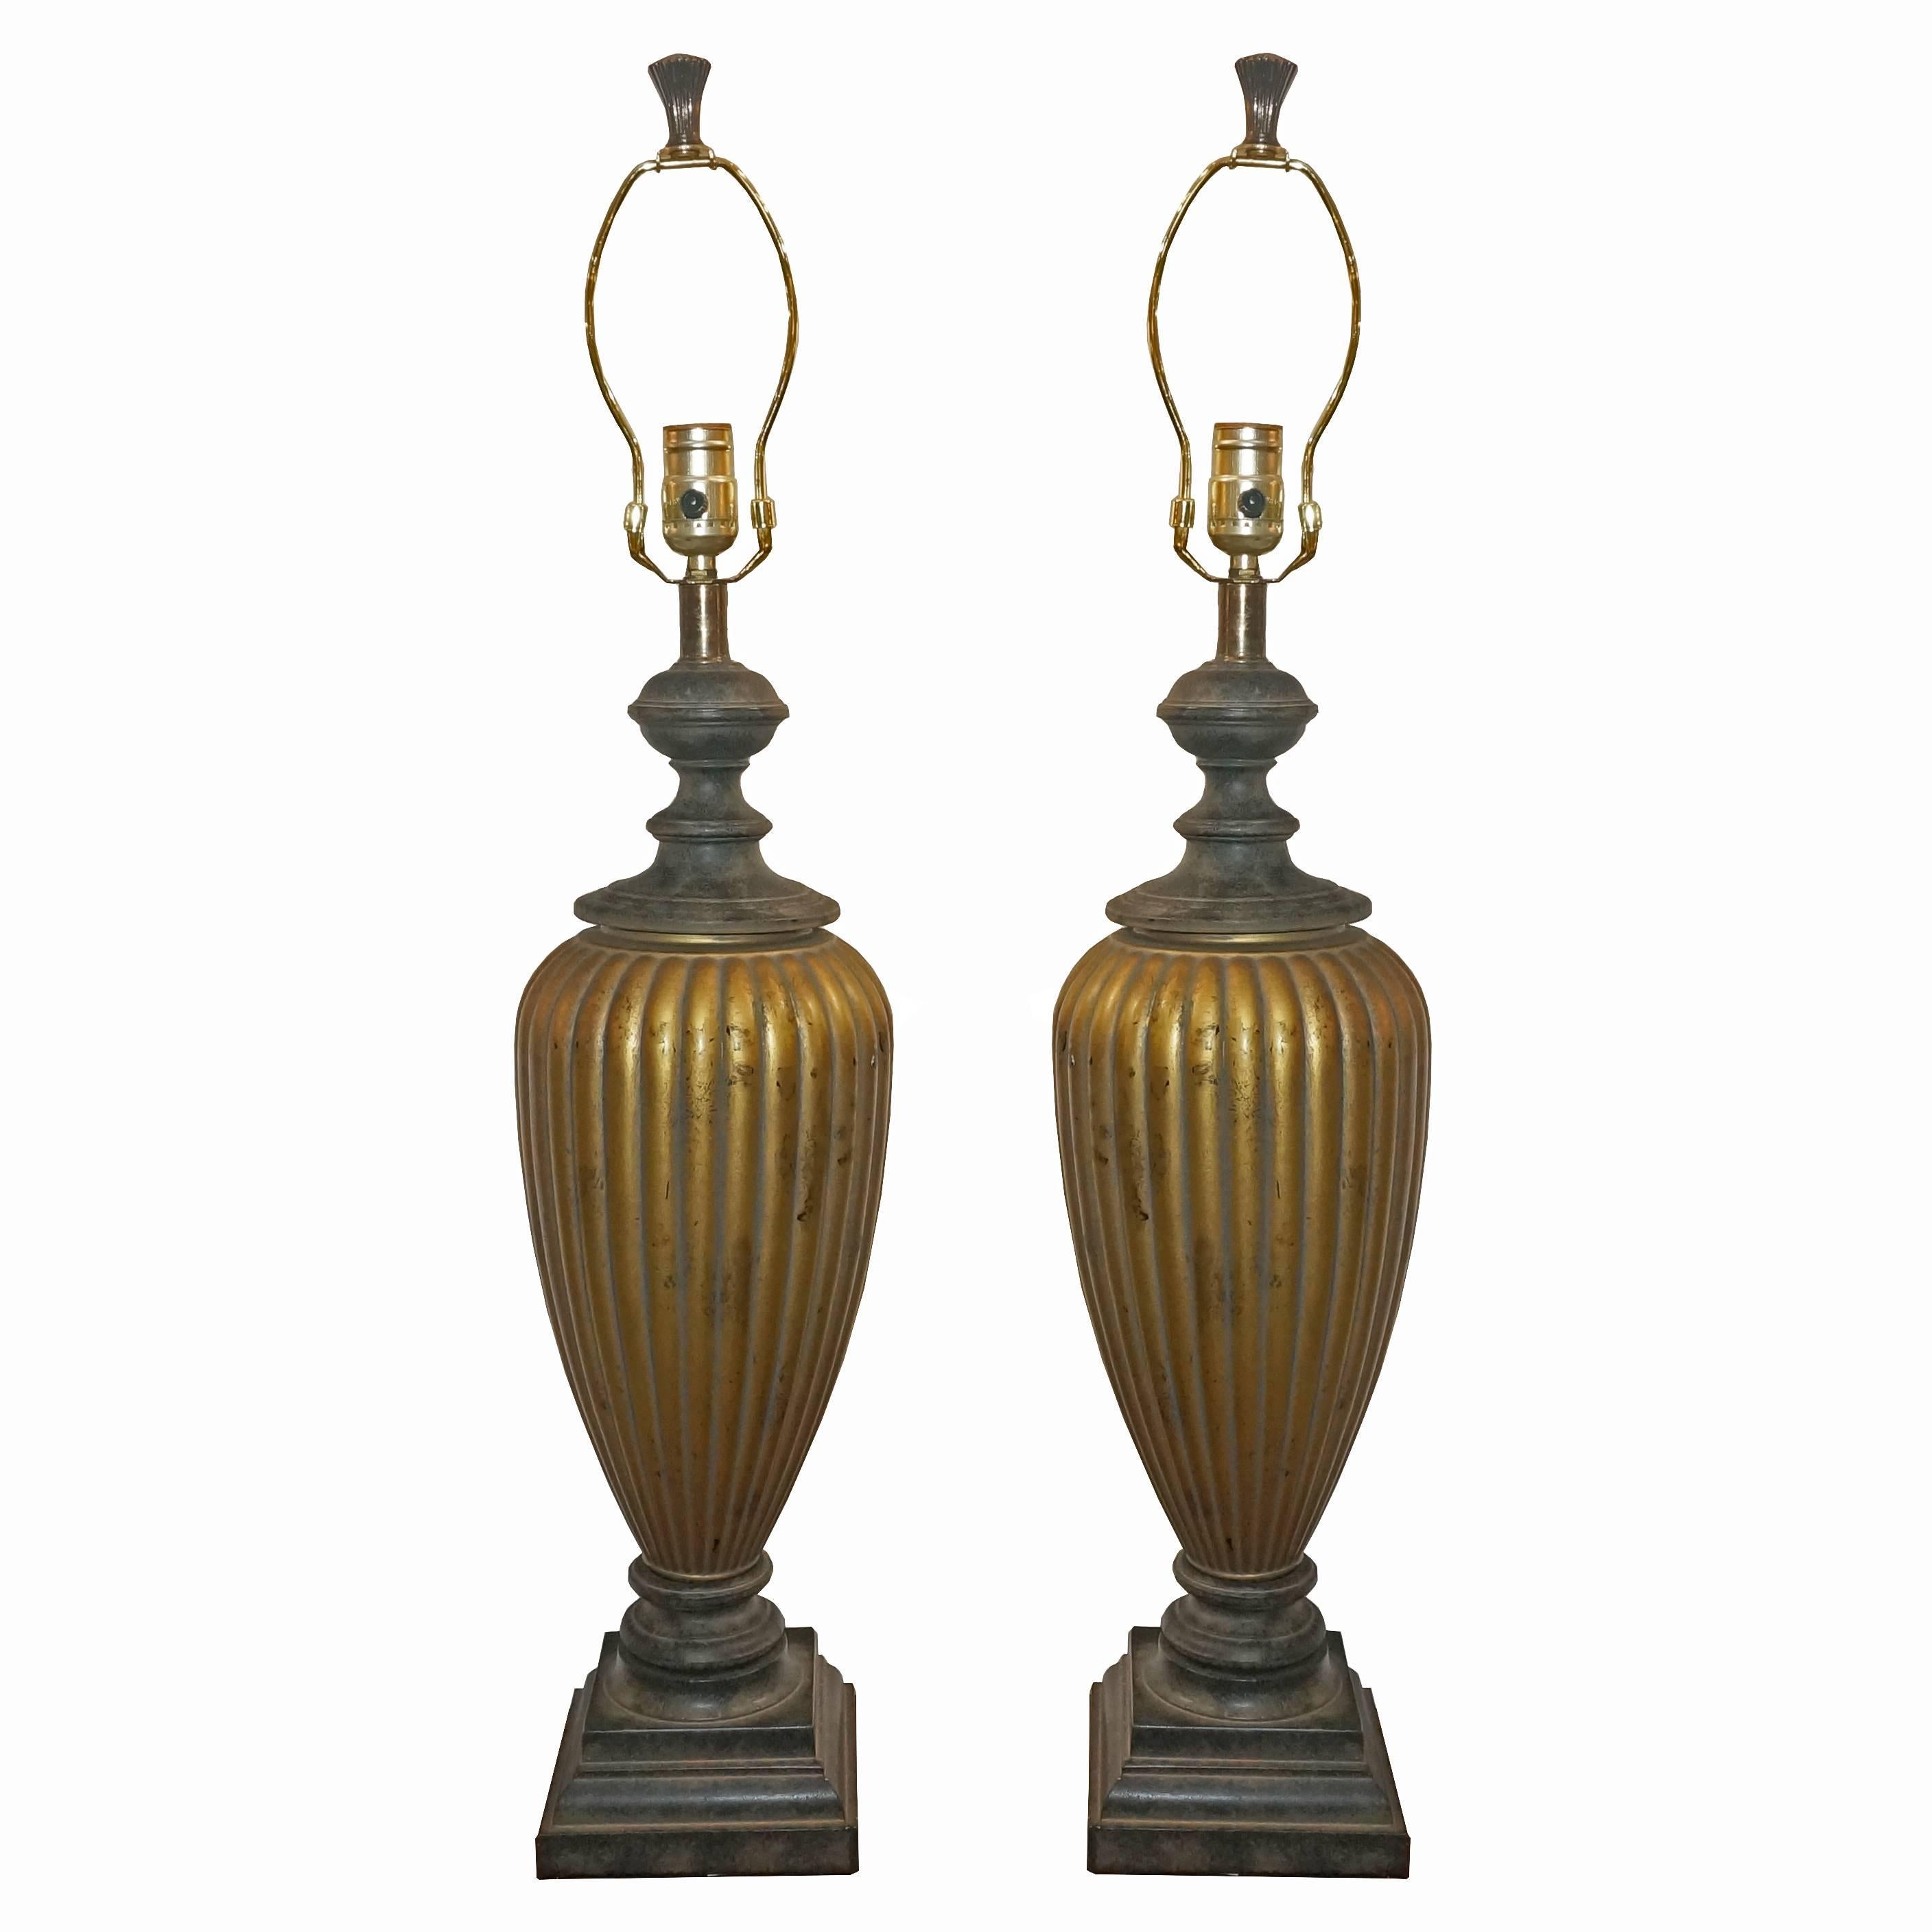 Pair of Hollywood Regency Style Table Lamps in Gold and Black Finish 